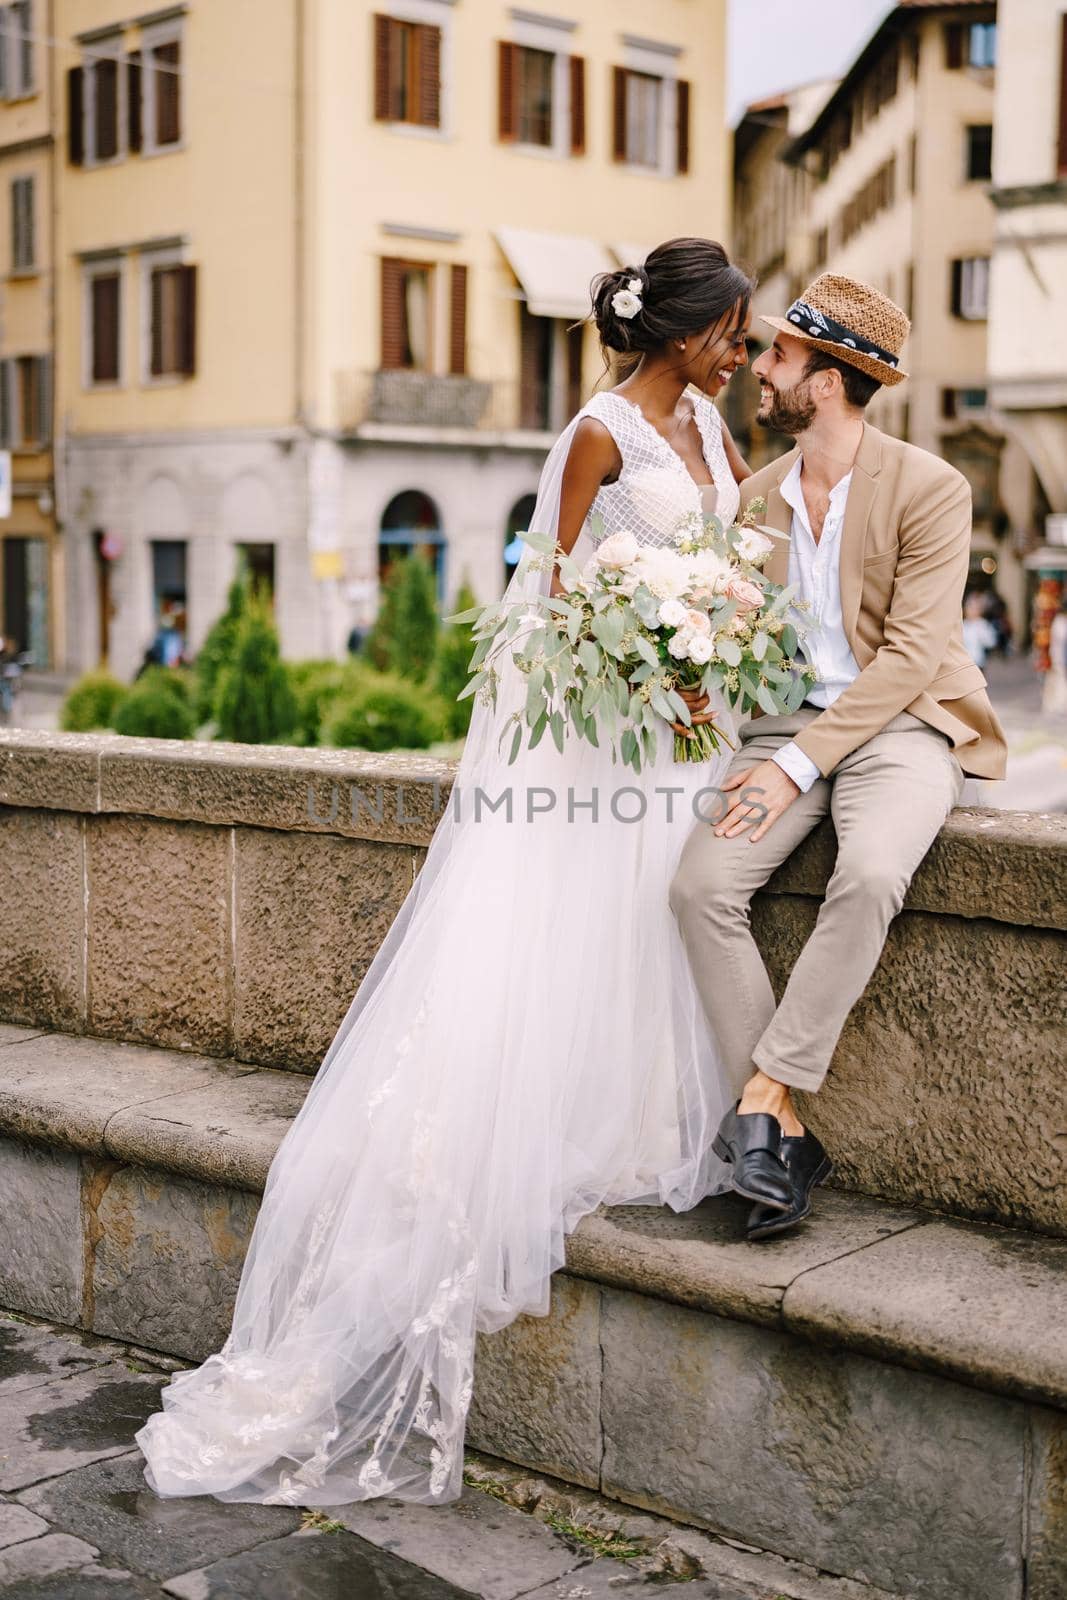 Interracial wedding couple. Wedding in Florence, Italy. African-American bride in a white dress with a long veil and a bouquet, and Caucasian groom in a sandy jacket and straw hat. by Nadtochiy